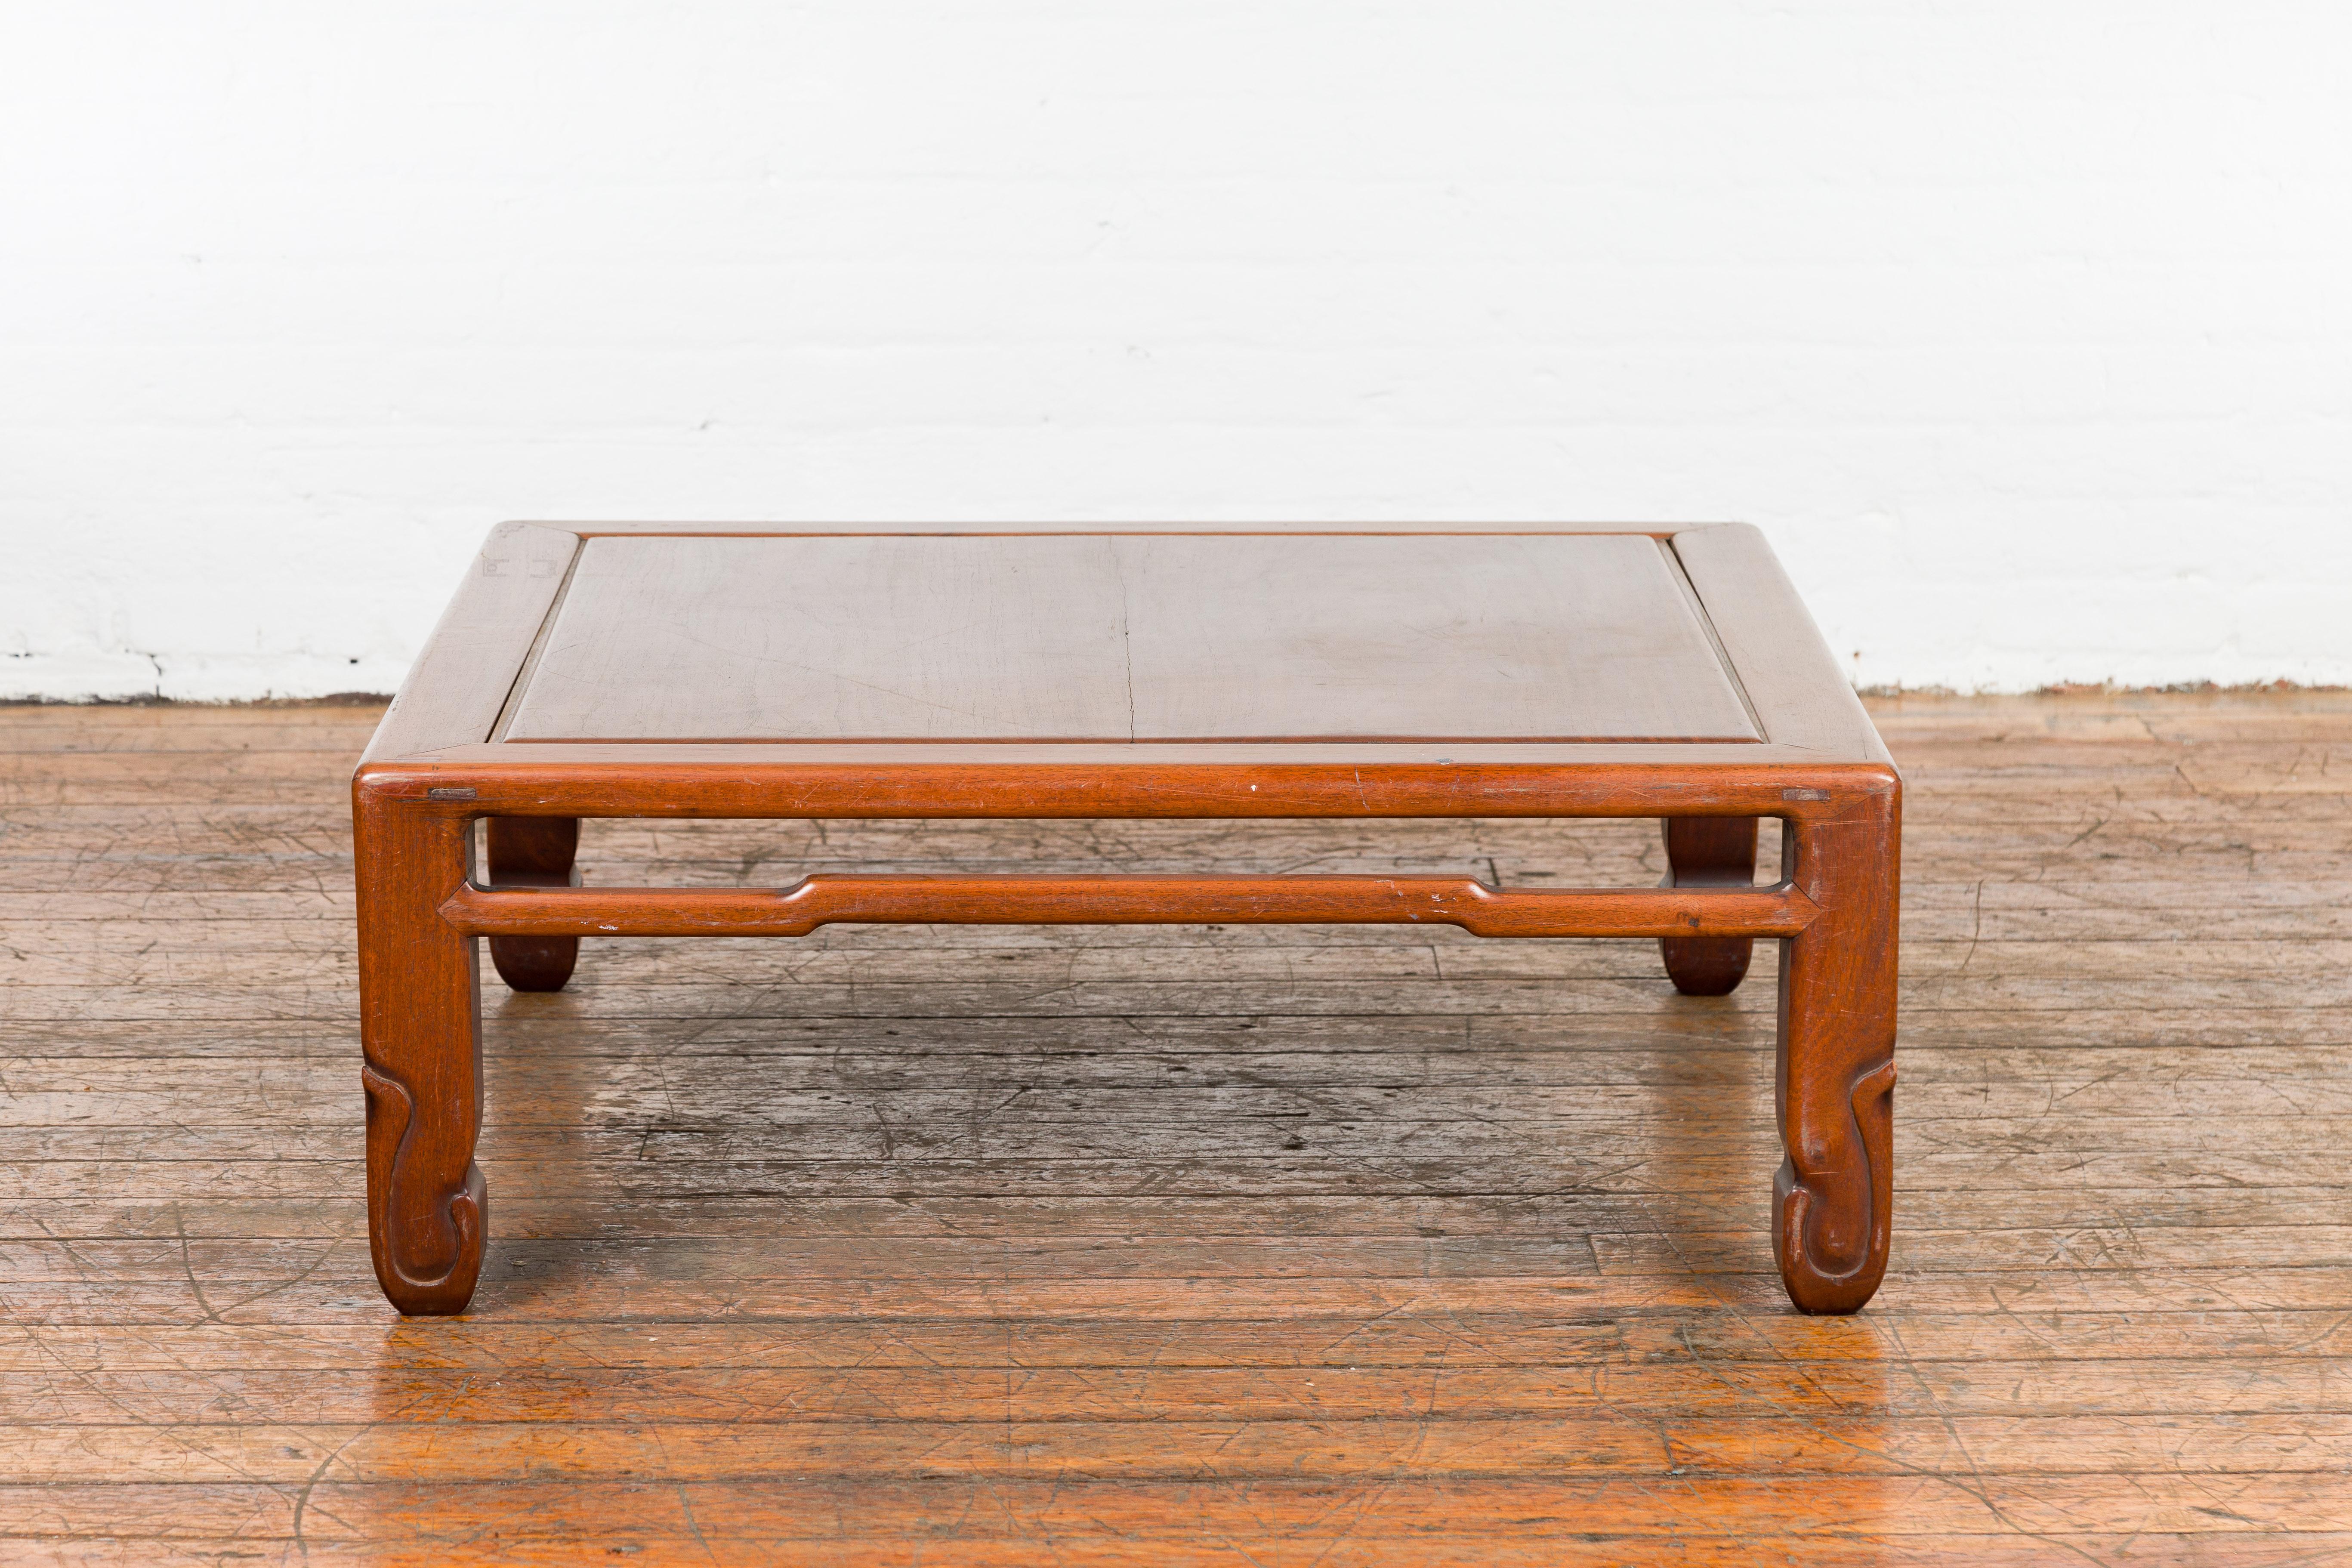 19th Century Low Kang Coffee Table with Humpback Stretcher and Horsehoof Feet For Sale 5